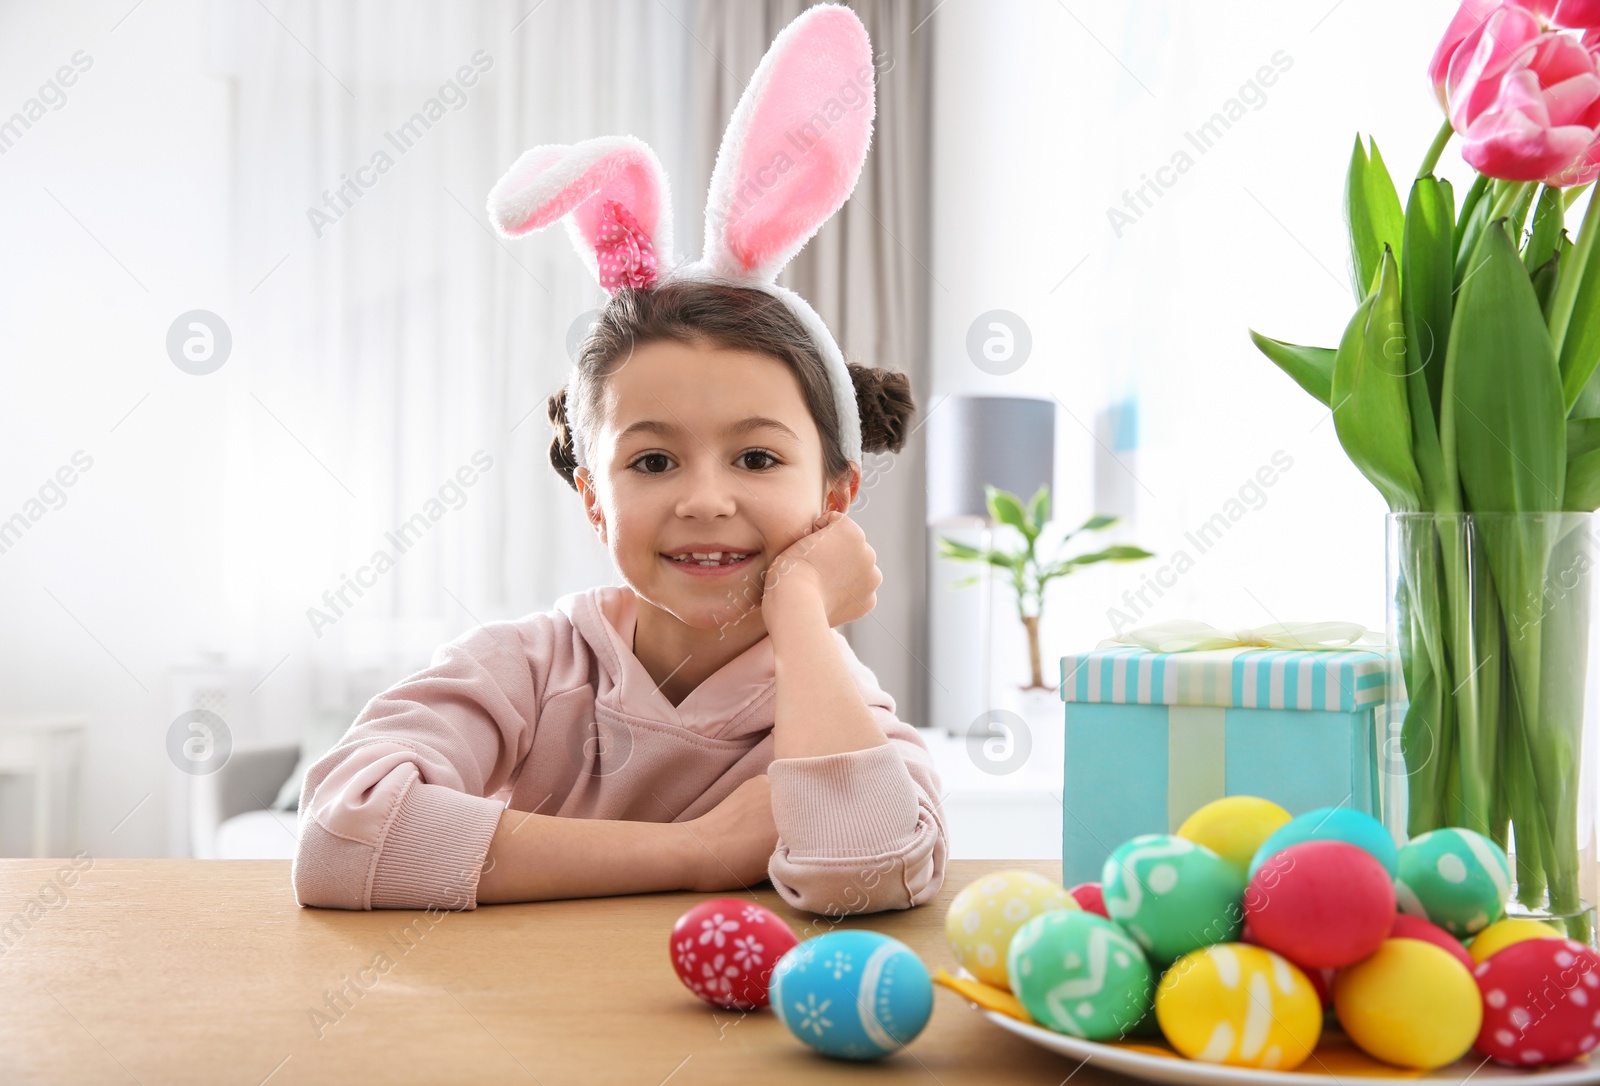 Photo of Cute little girl with bunny ears headband and painted Easter eggs sitting at table in room